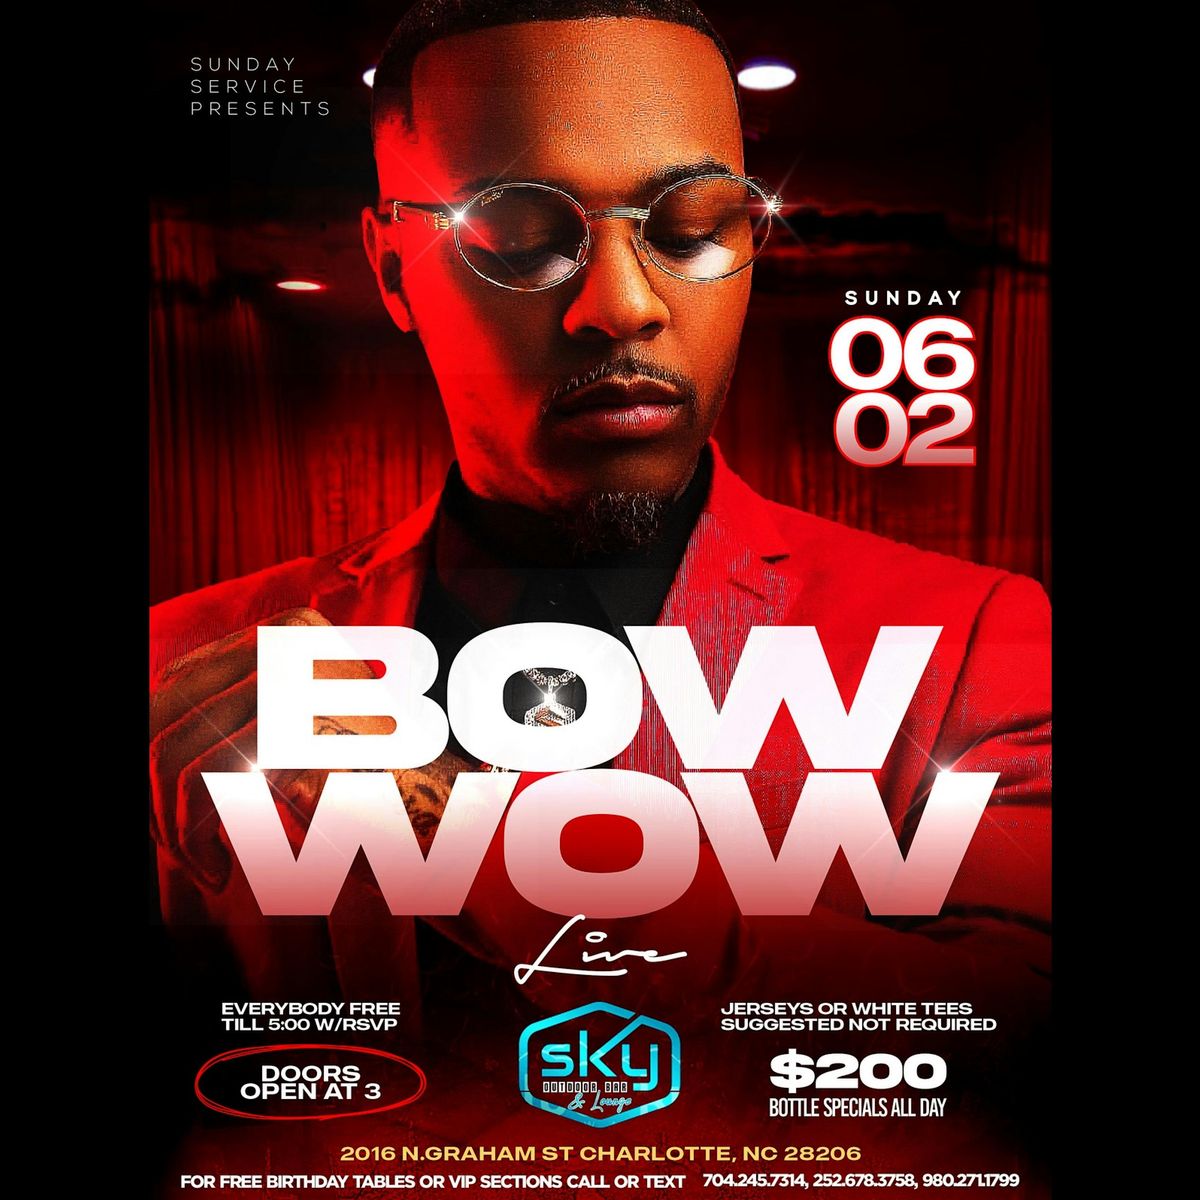 SUNDAY FUNDAYS ARE BACK! BOW WOW THIS SUNDAY AT SKY PATIO BAR IN CHARLOTTE